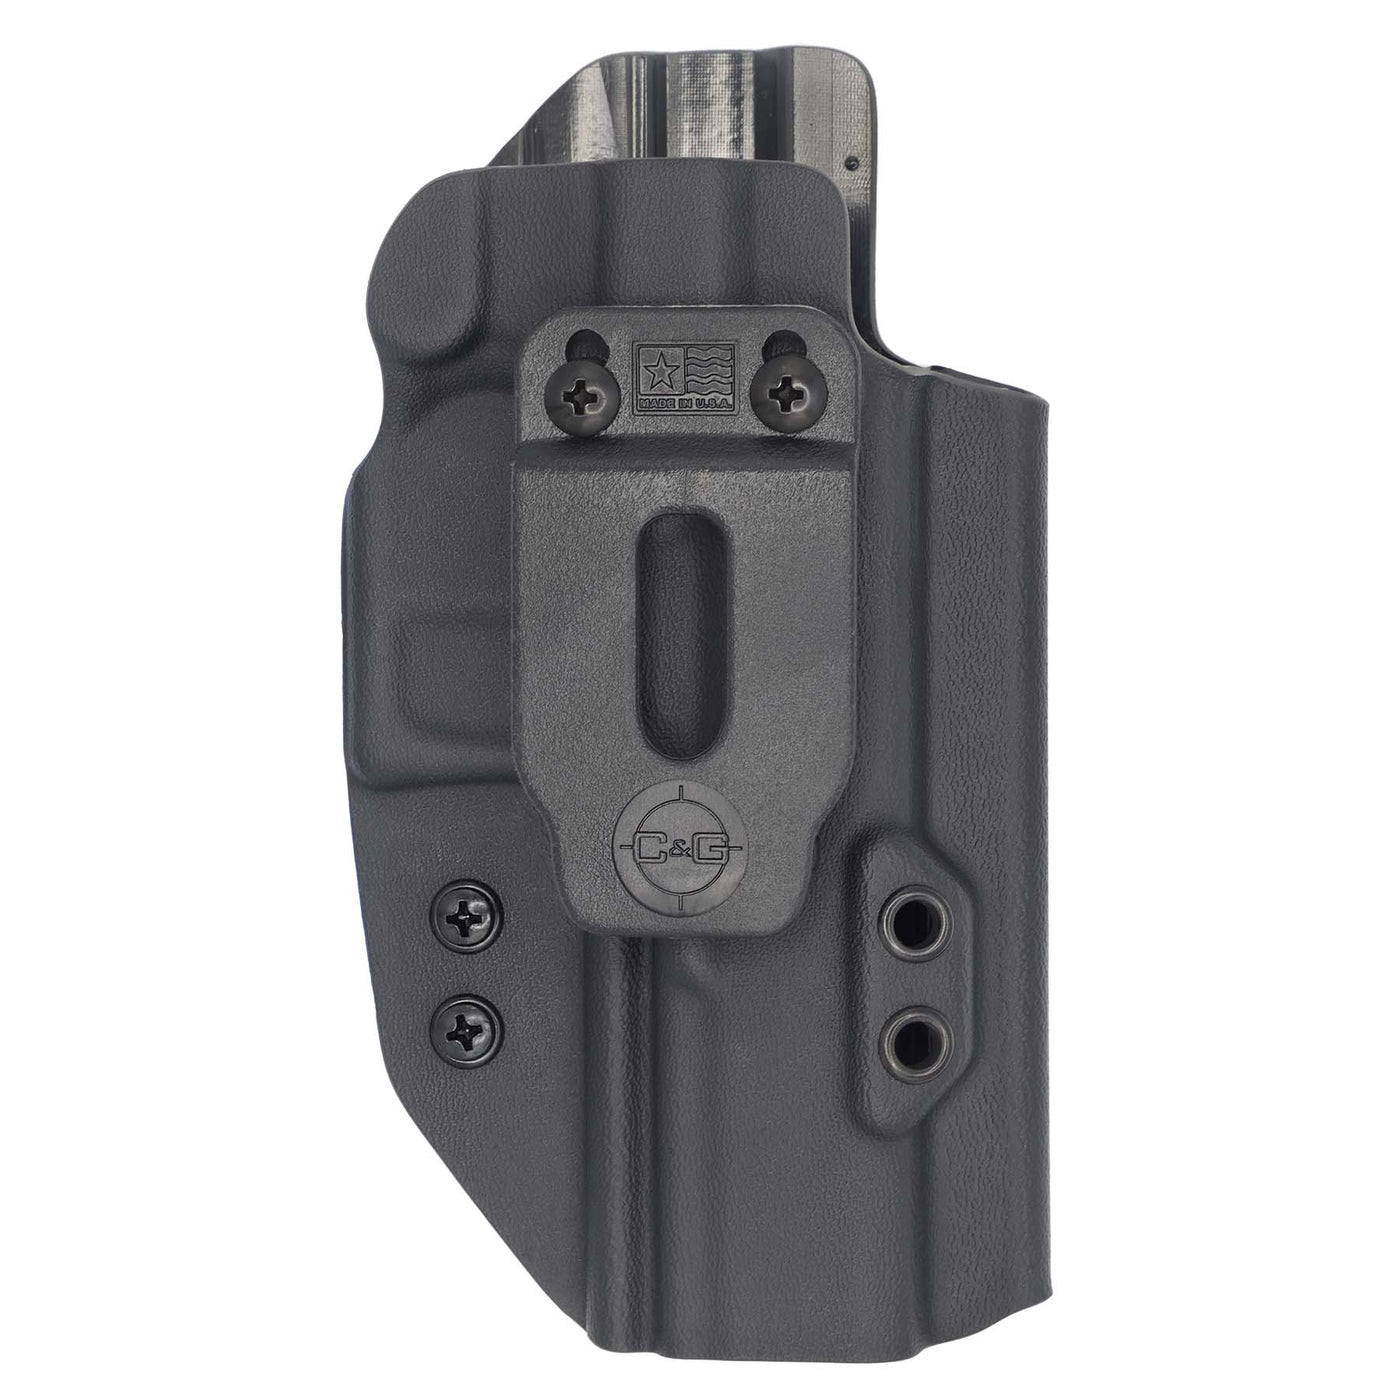 Walther PDP 4.5" IWB Covert Kydex Holster - Custom